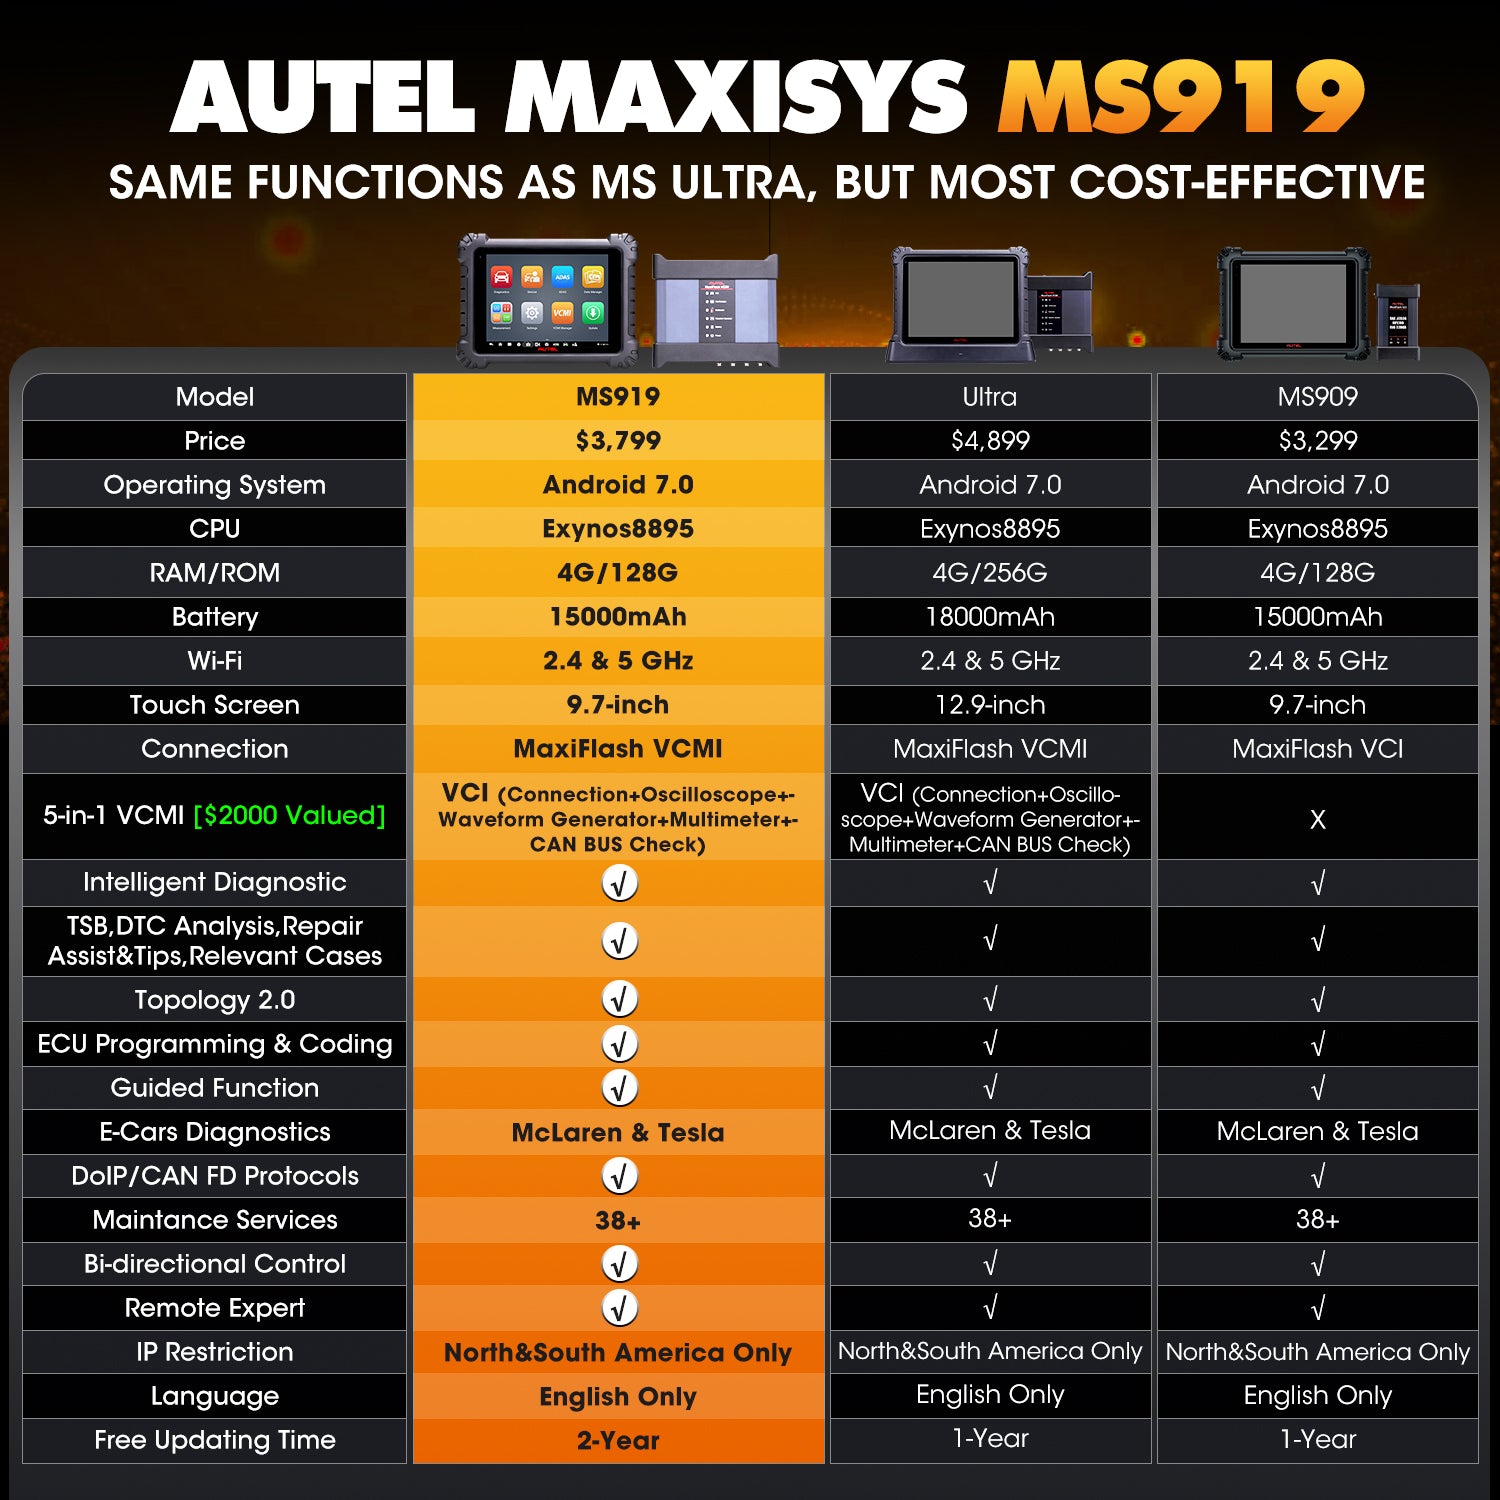 Comparison of Autel Maxisys MS908SP, Elite, MS909, MS919 and Ultra